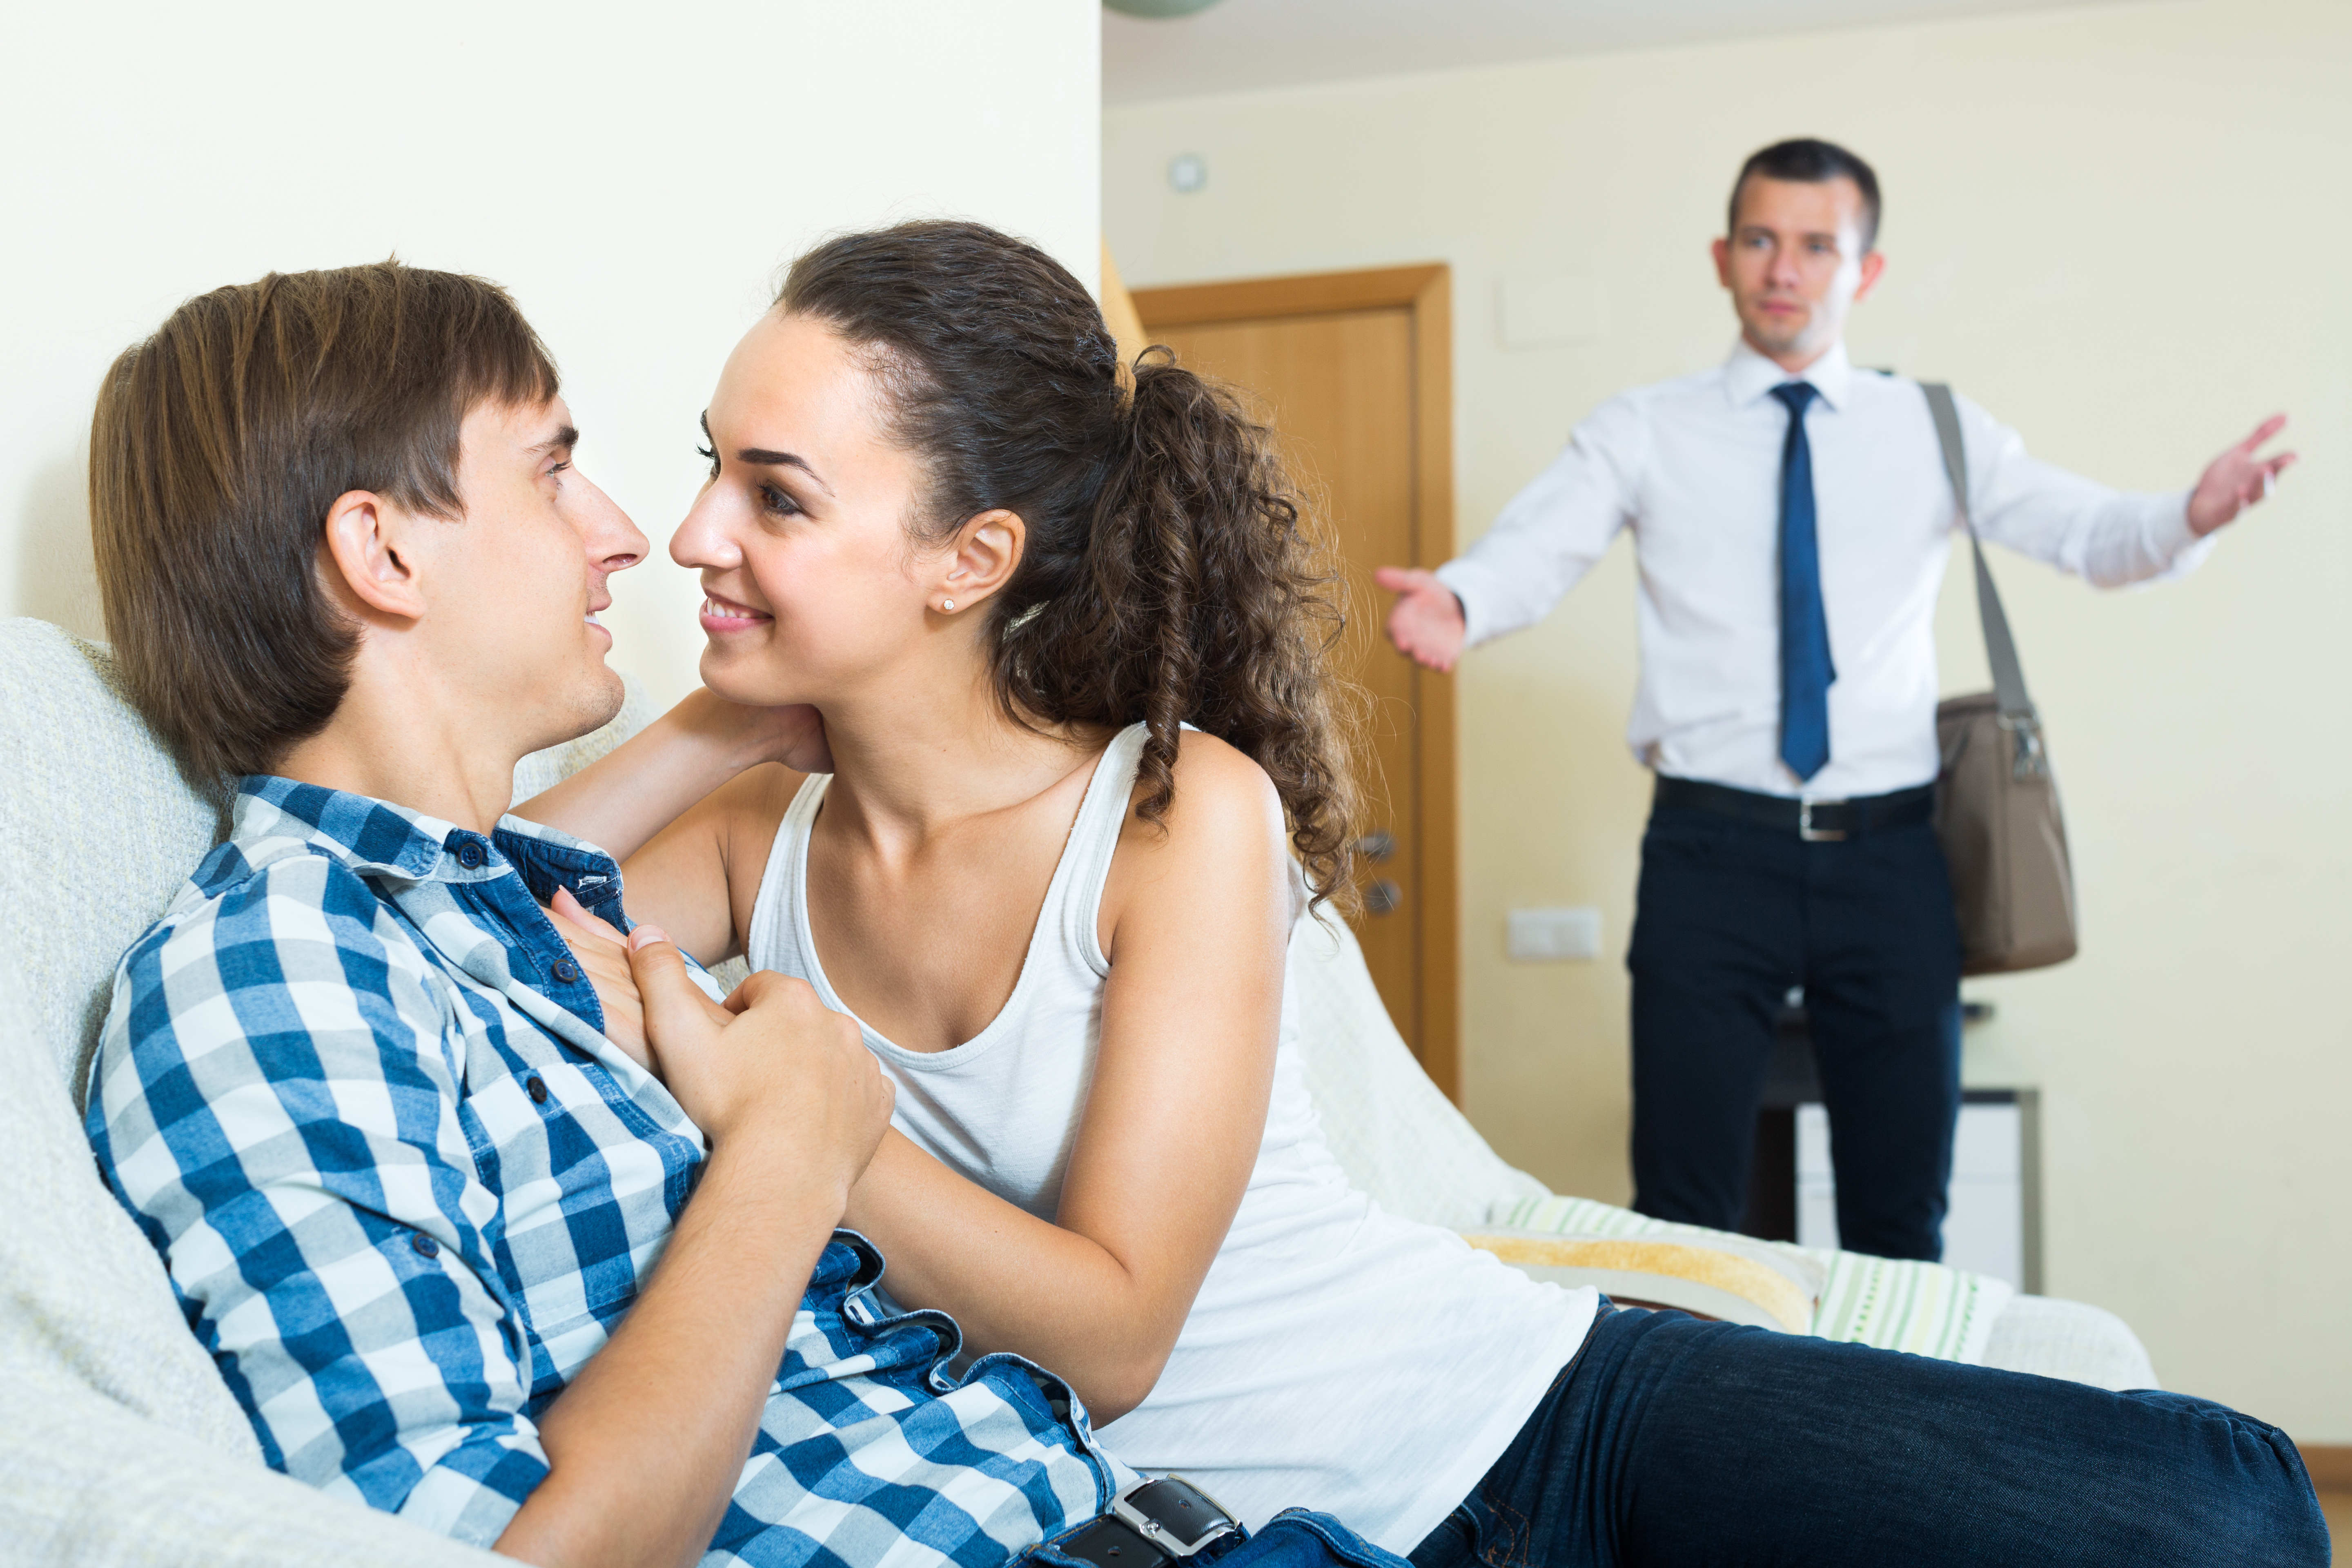 Upset man coming home and seeing girlfriend cheating on him | Source: Shutterstock